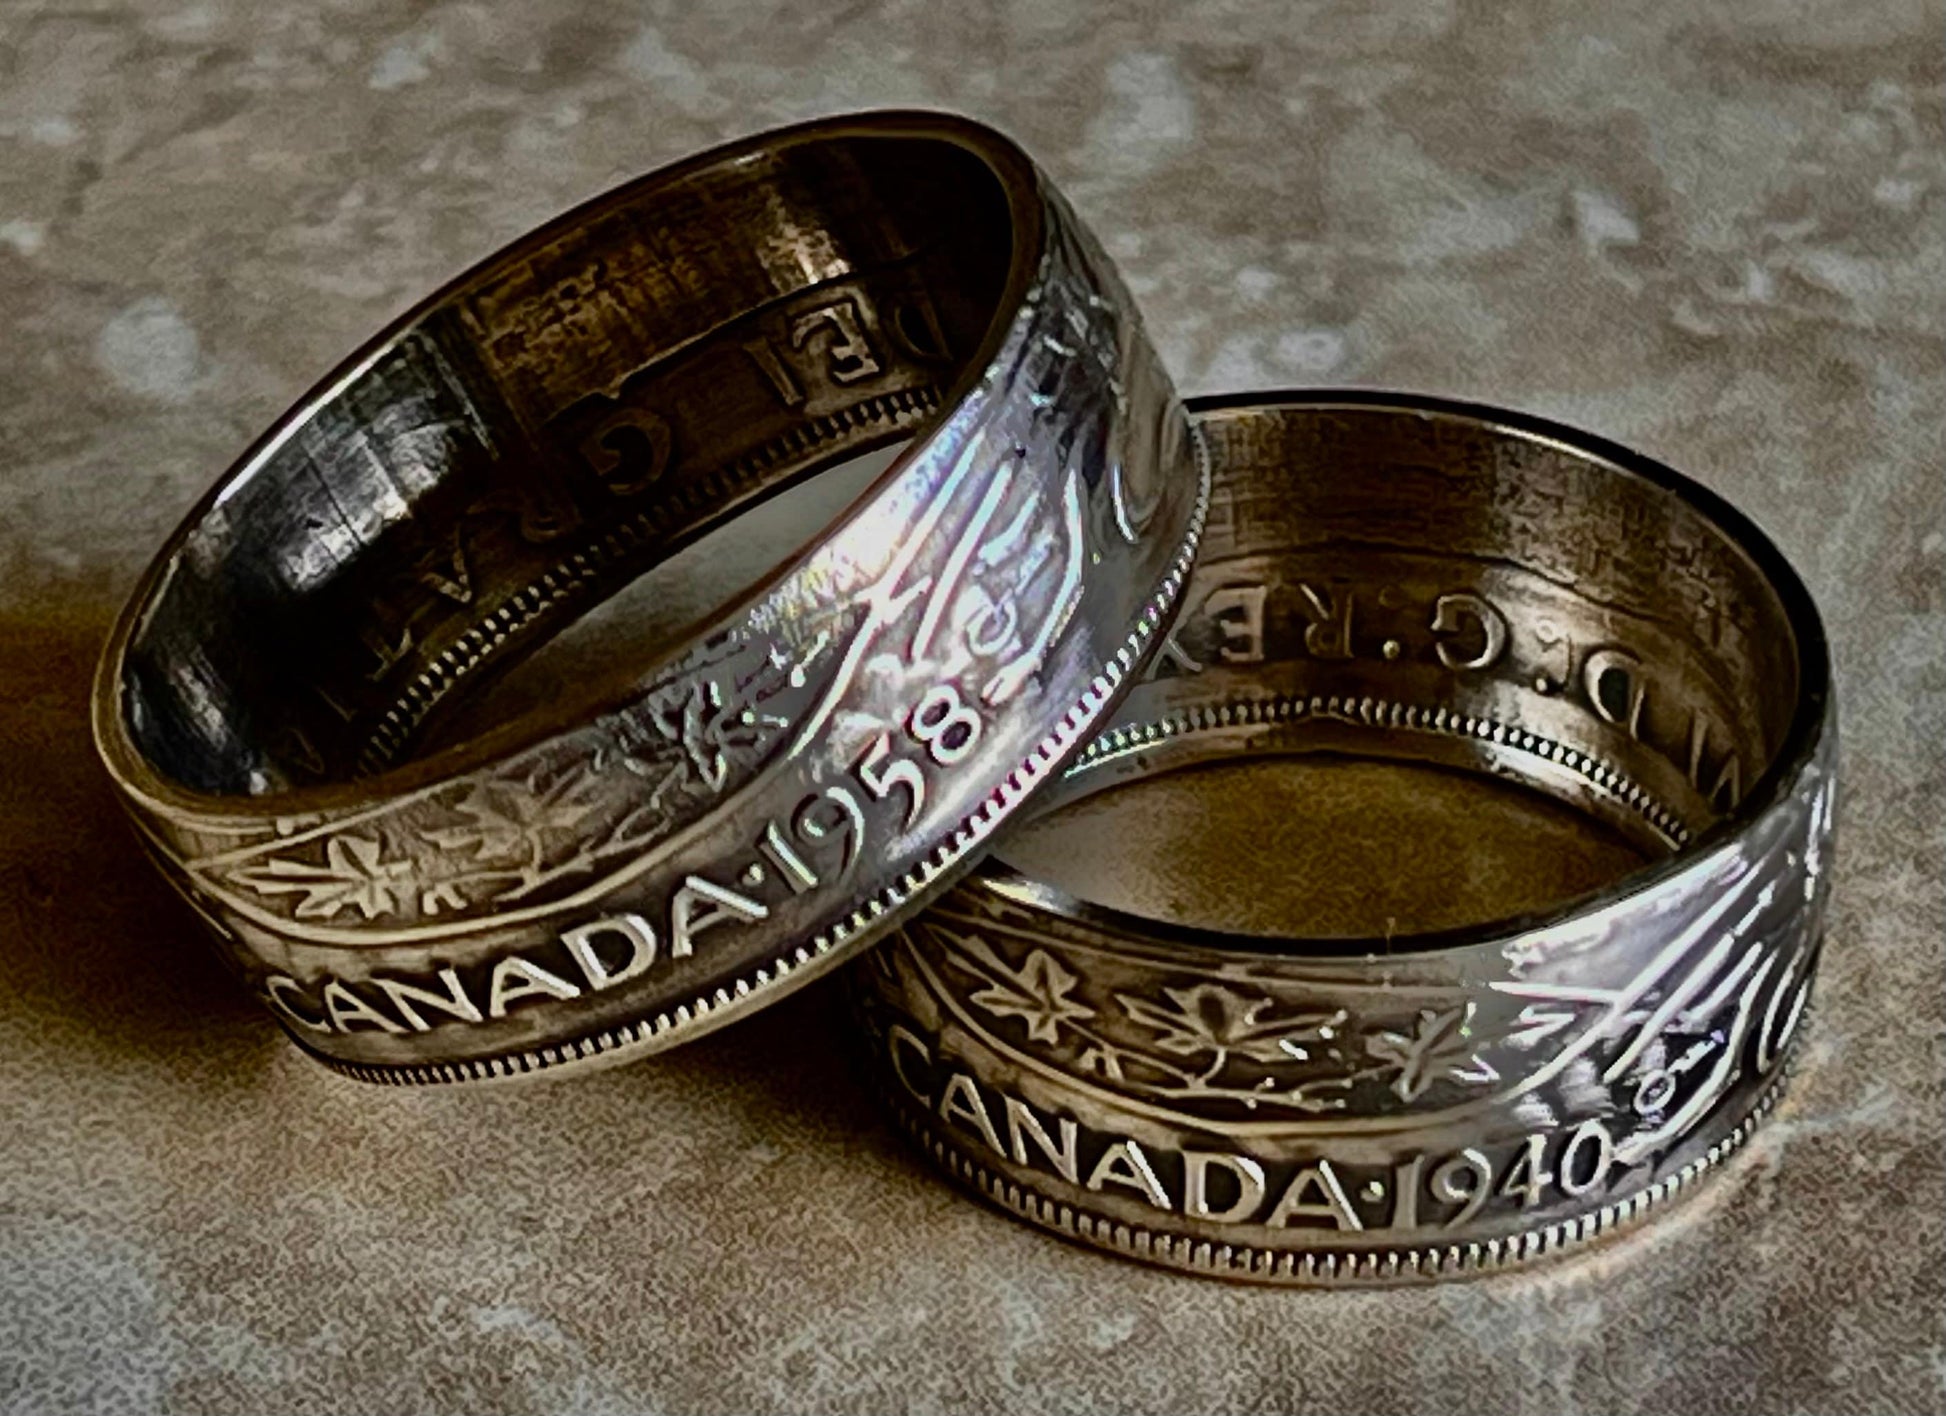 Canada Ring Silver 50 Cent Piece Canadian Coin Ring Handmade Personal Jewelry Ring Gift For Friend Gift For Him Her World Coin Collector